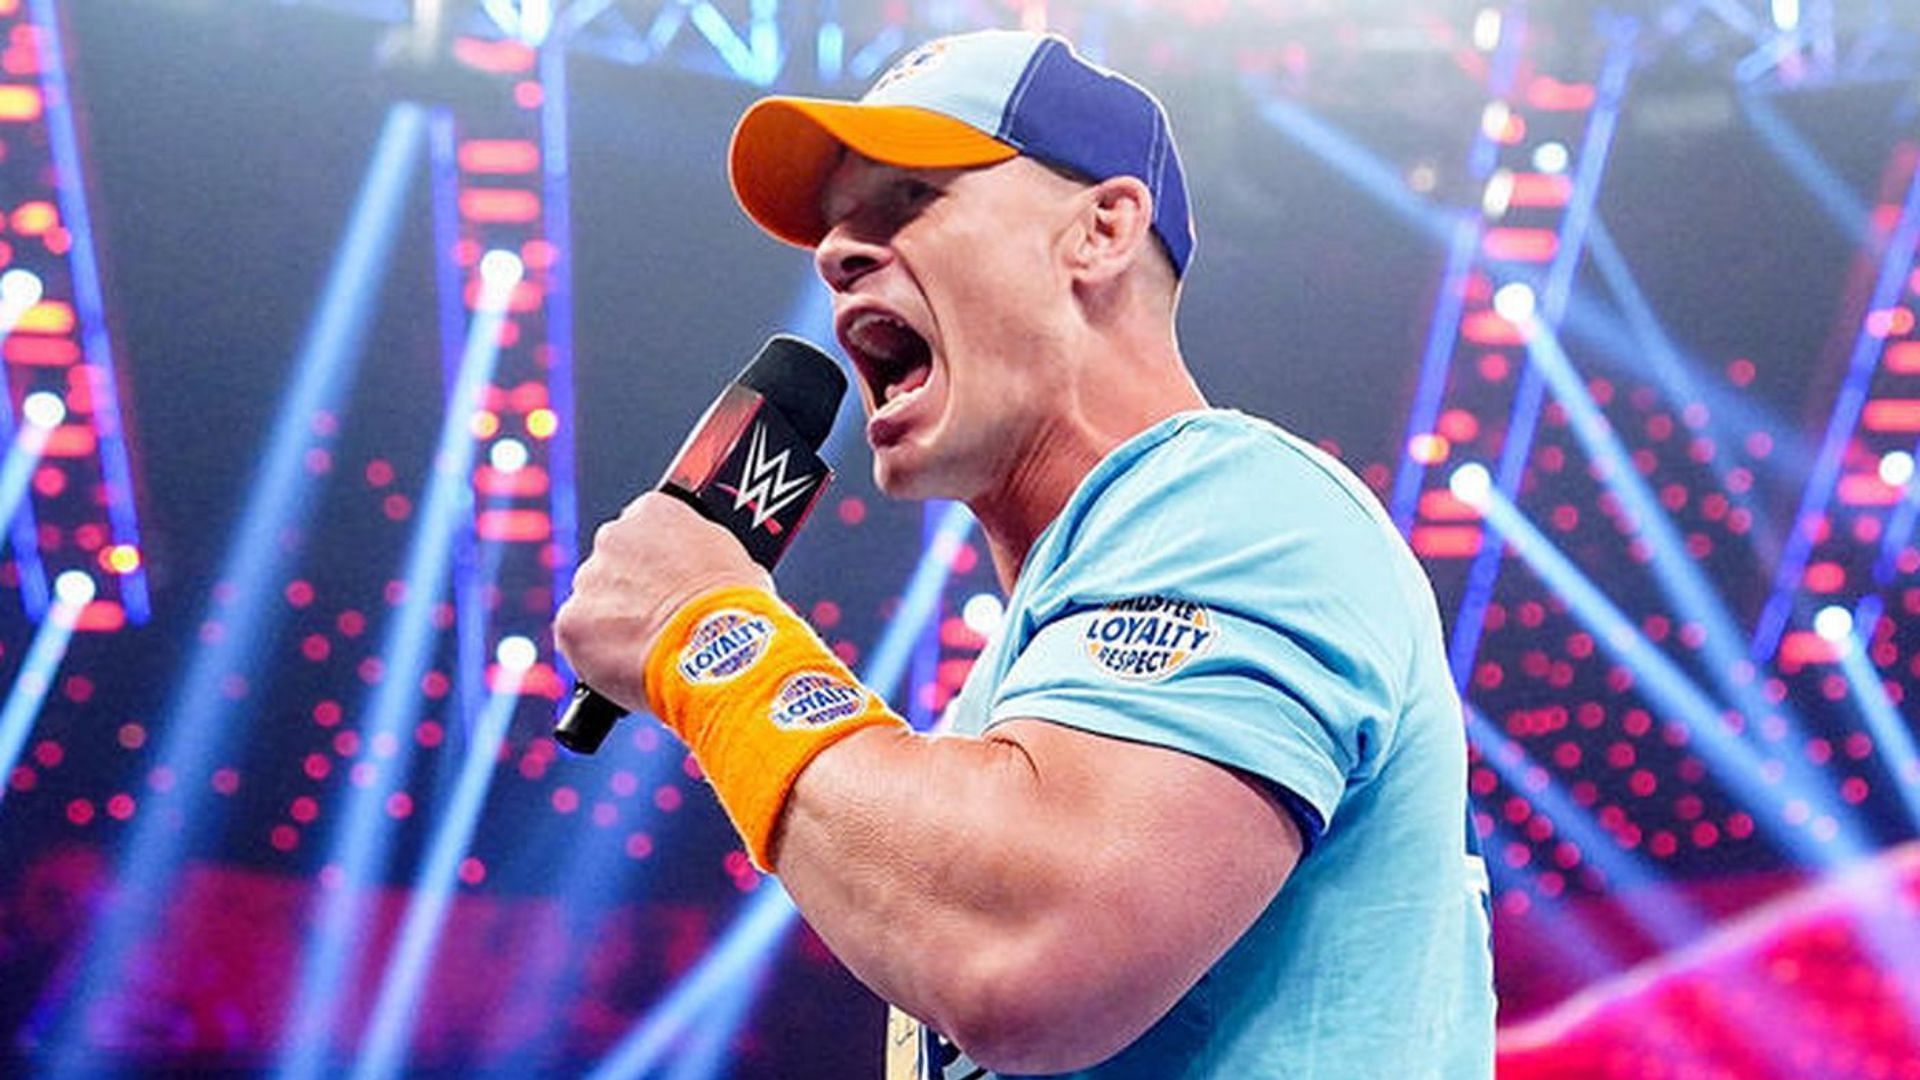 John Cena is slated to return to WWE television this Friday night!